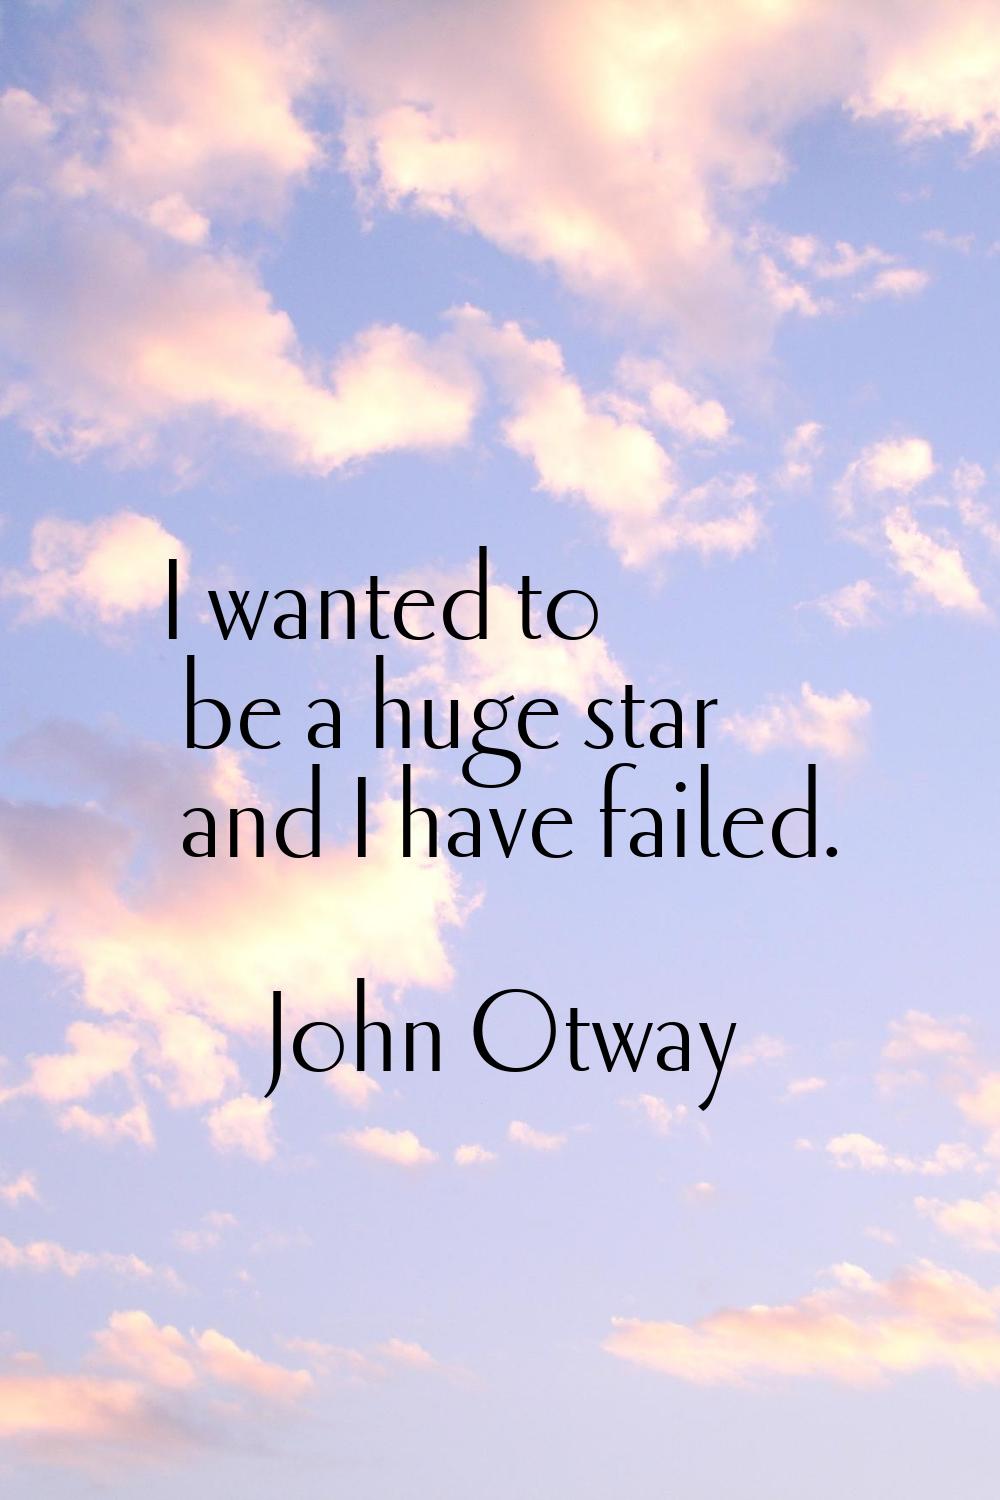 I wanted to be a huge star and I have failed.